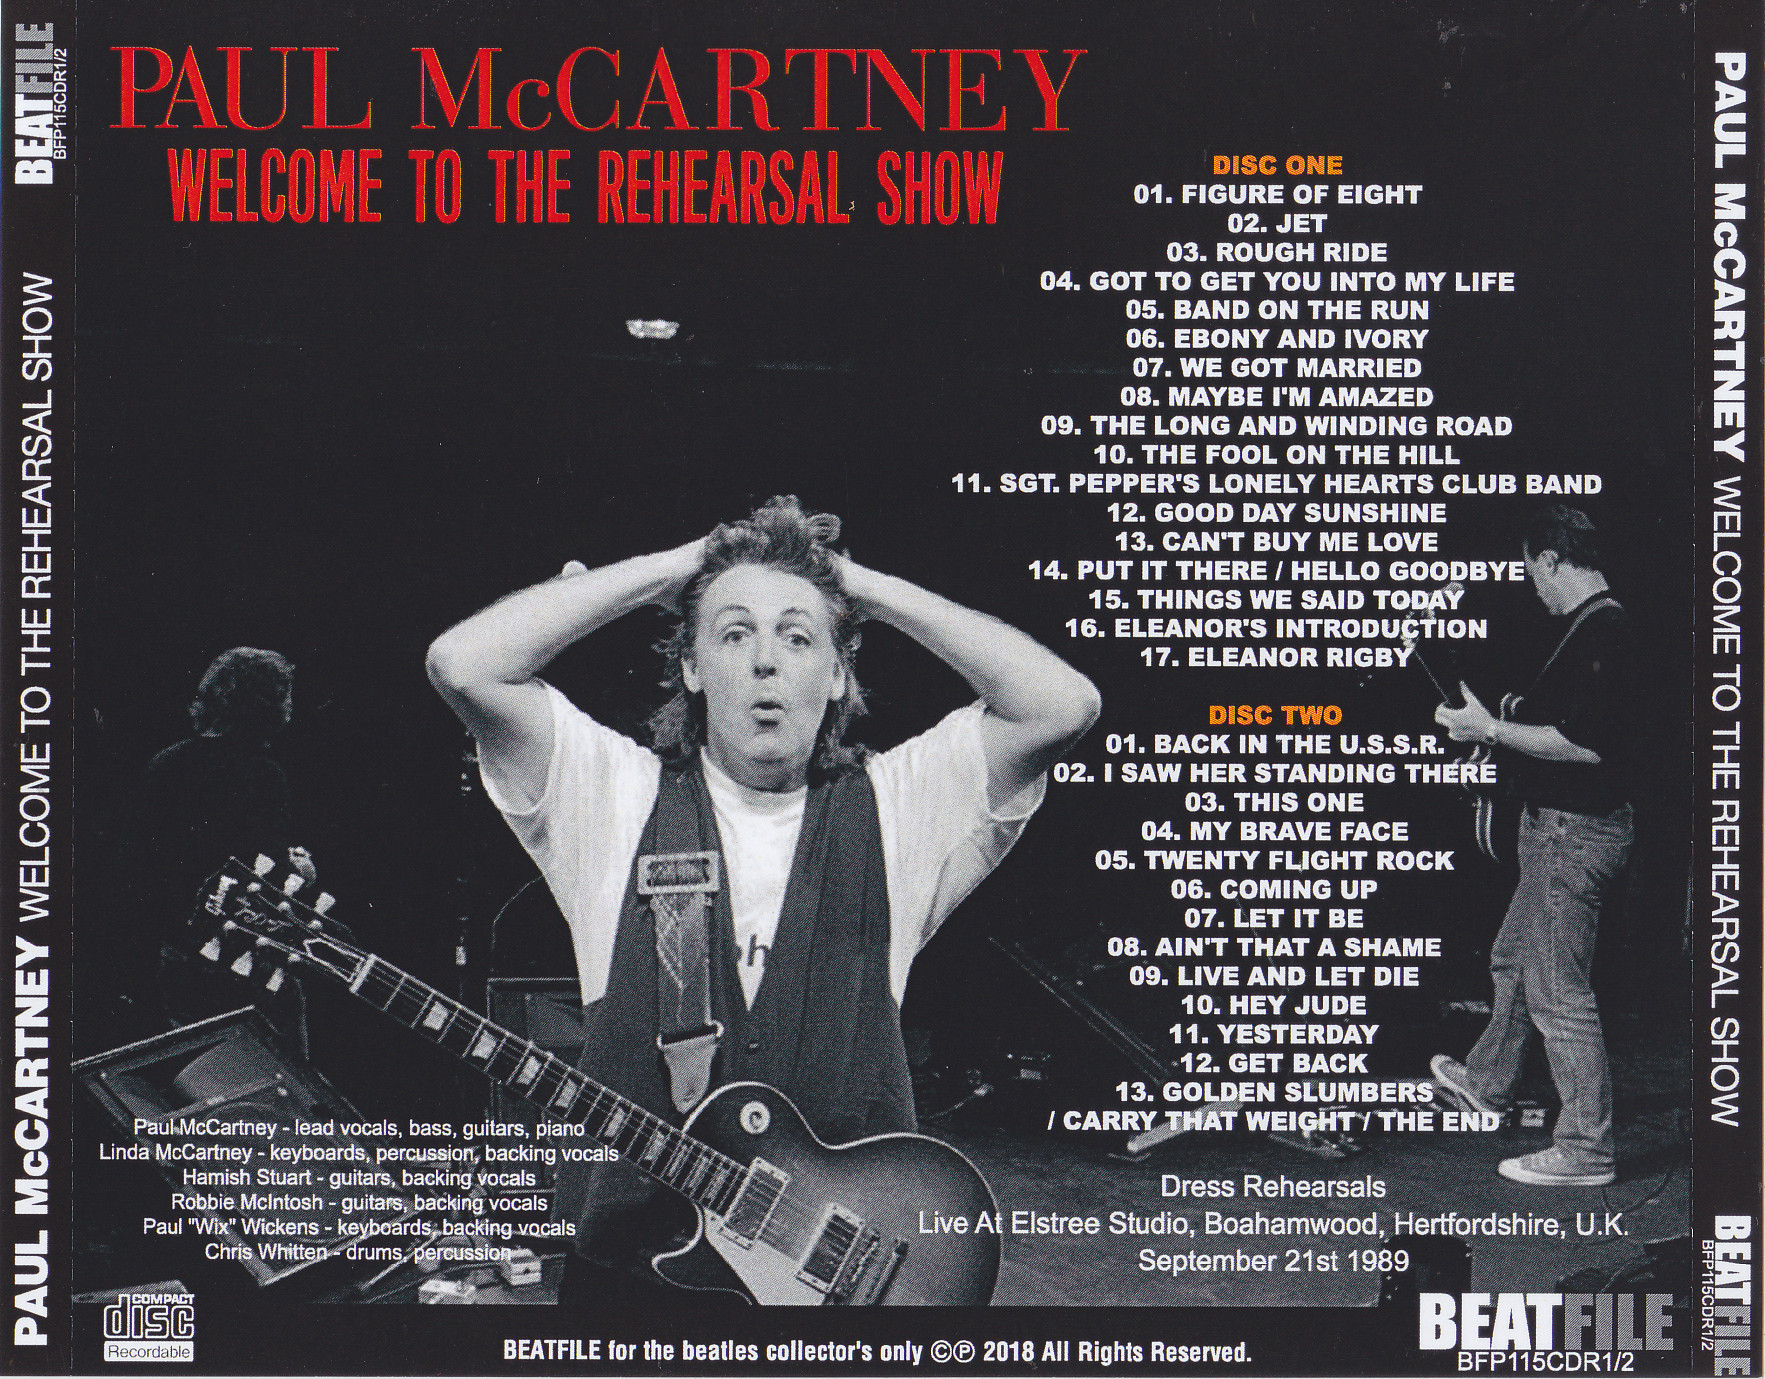 Paul McCartney / Welcome To The Rehearsals Show / 2CDR – GiGinJapan